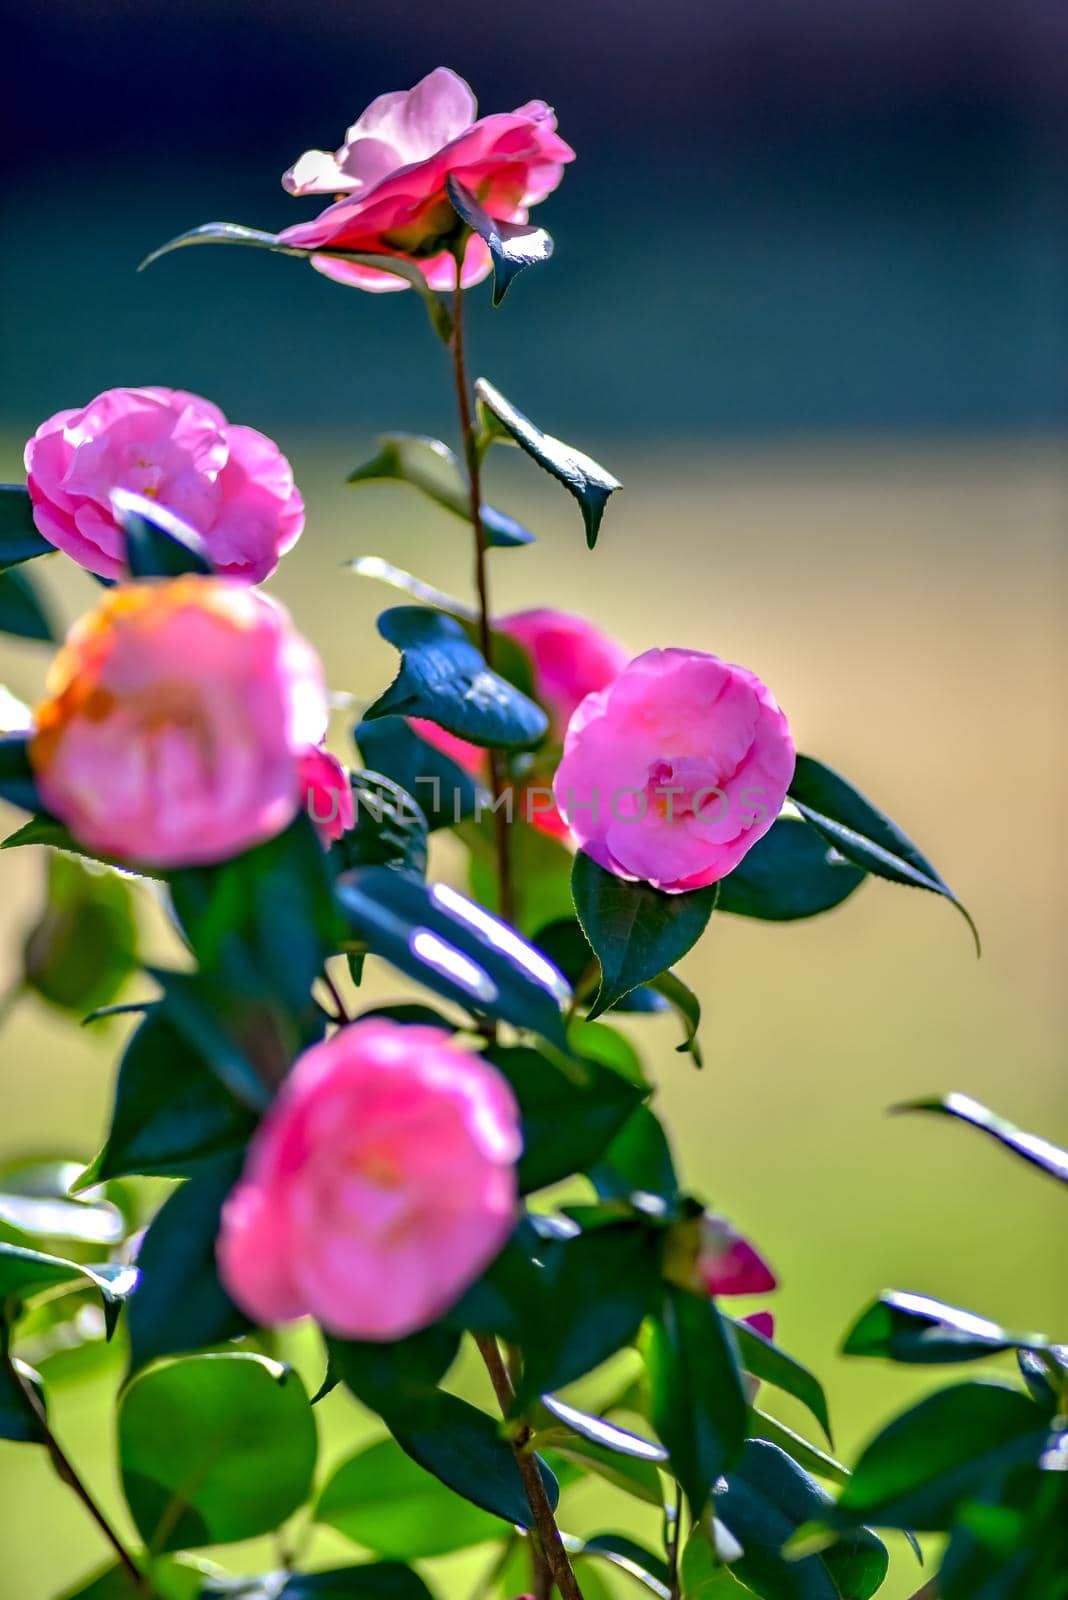 Pink camelia flowers growing in the home garden, close up shot by digidreamgrafix